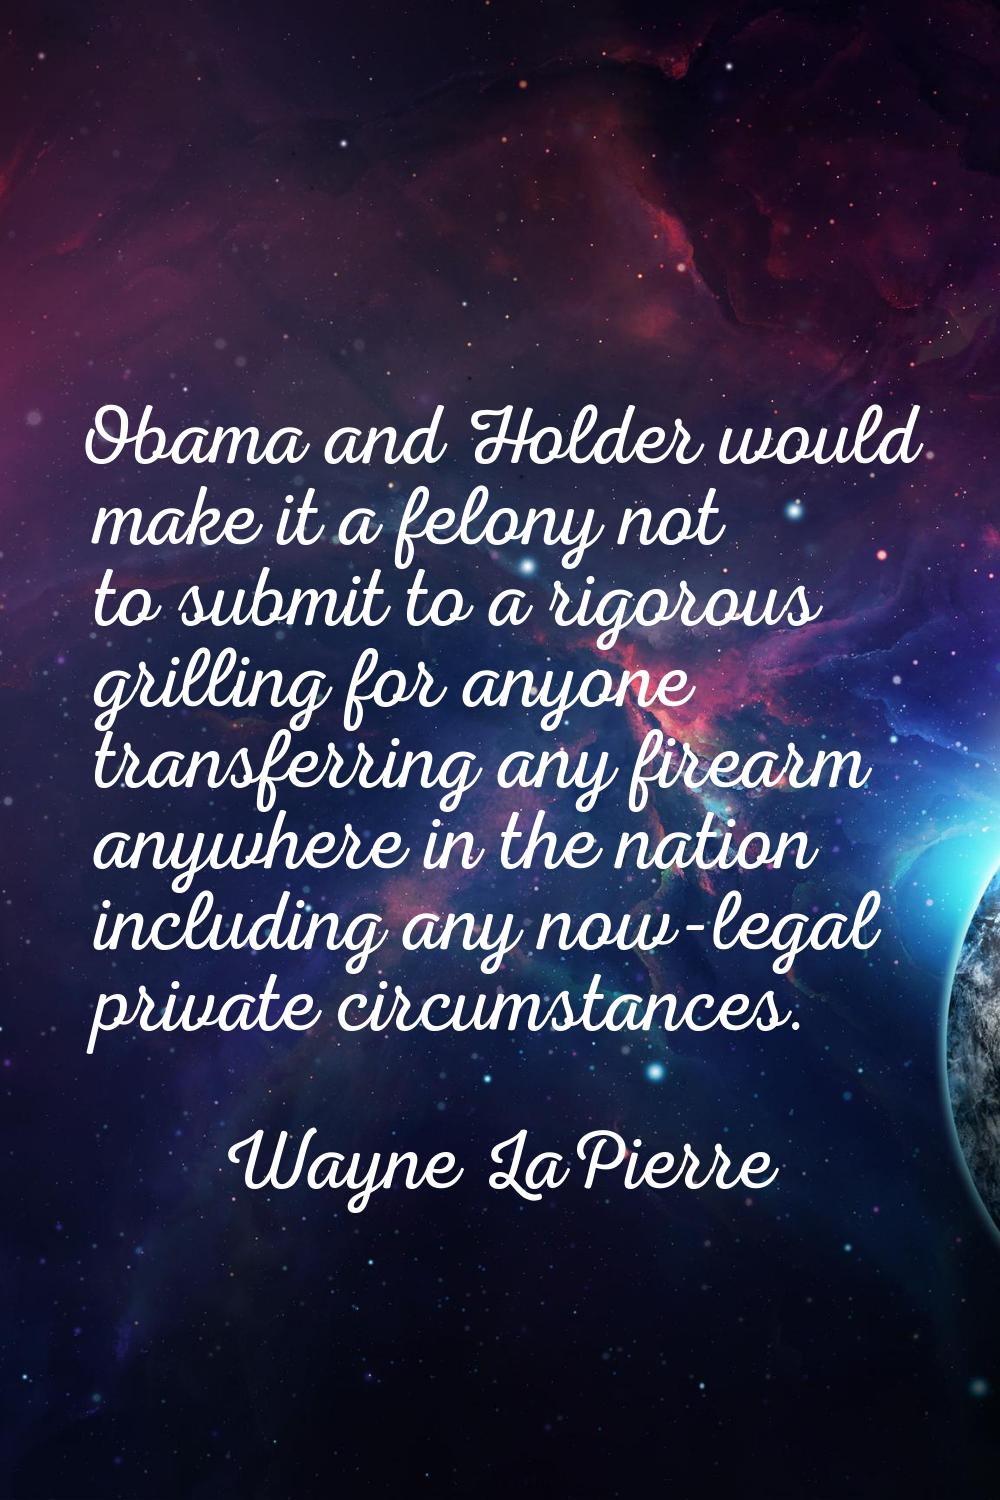 Obama and Holder would make it a felony not to submit to a rigorous grilling for anyone transferrin